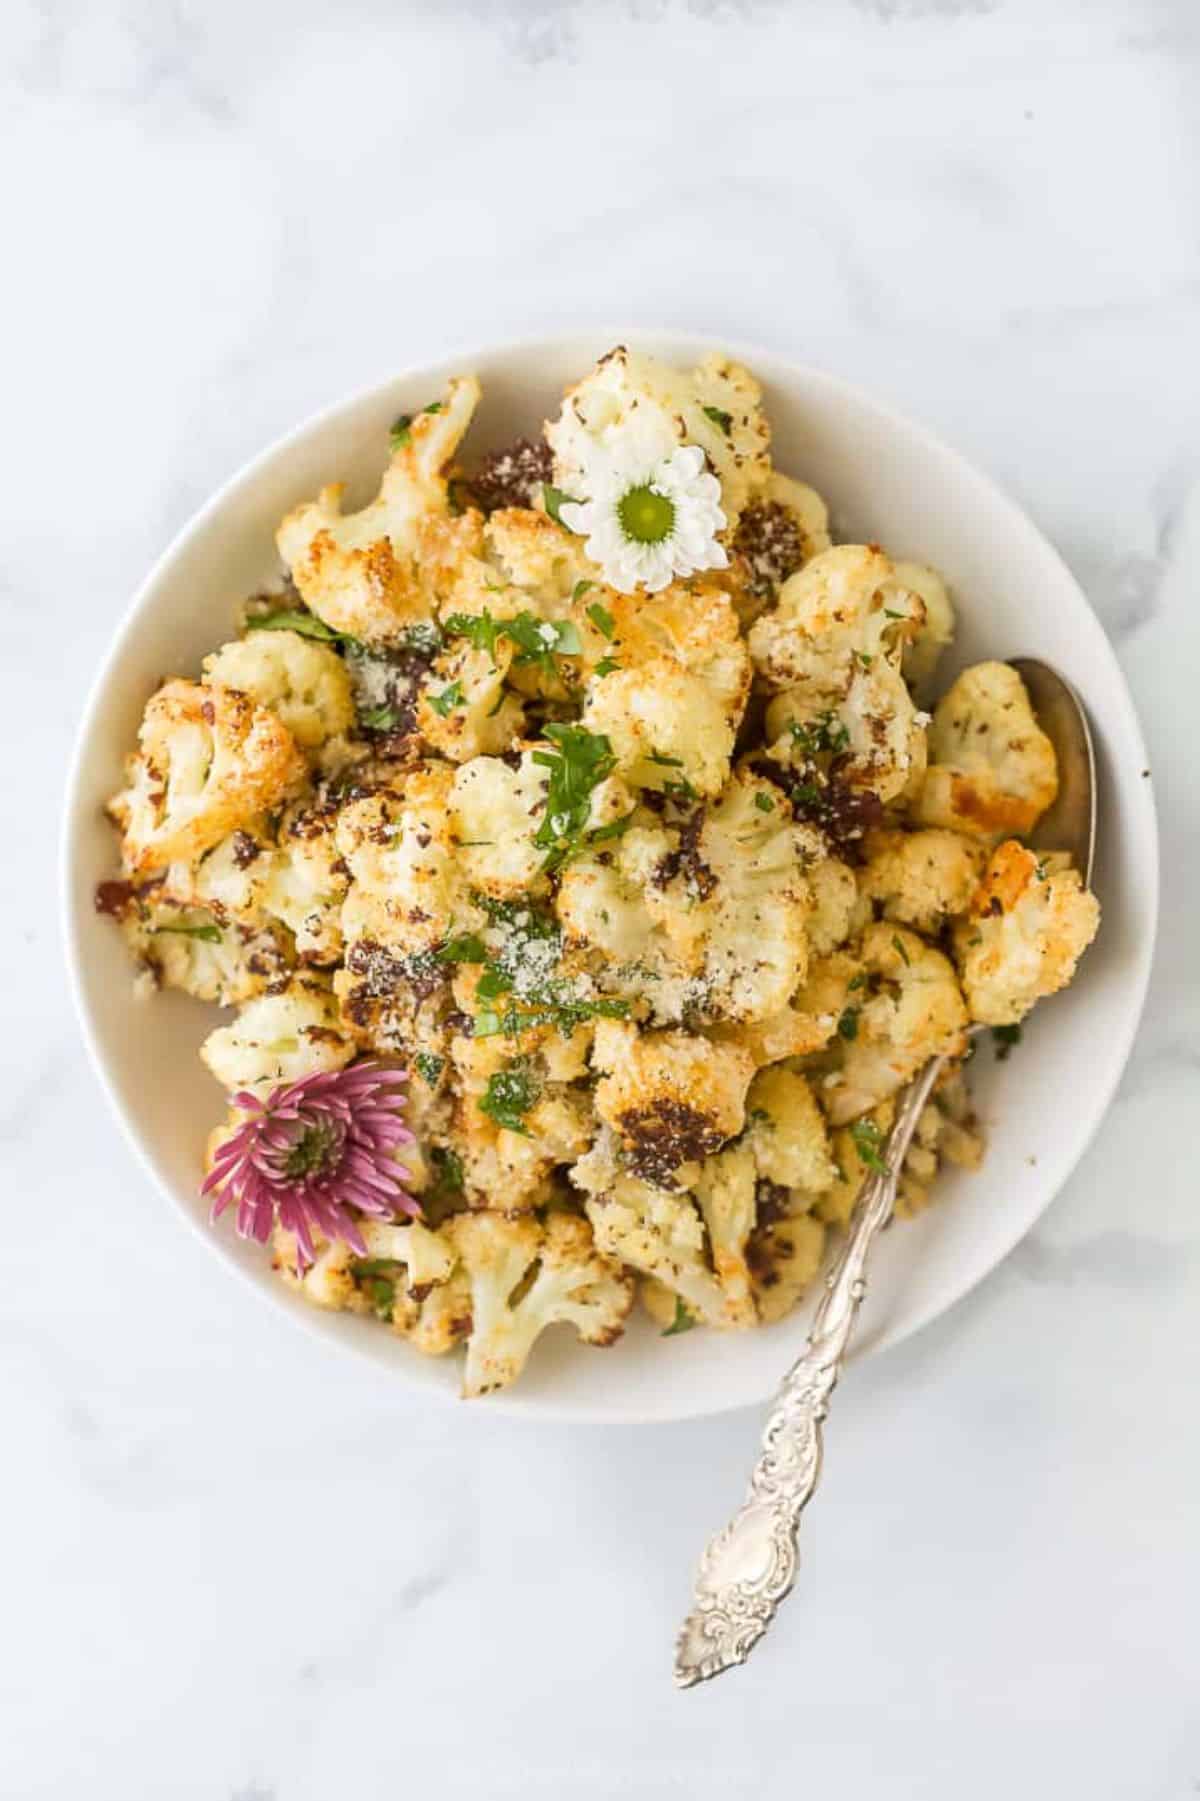 Delicious Parmesan Roasted Cauliflower in a bowl with a spoon.